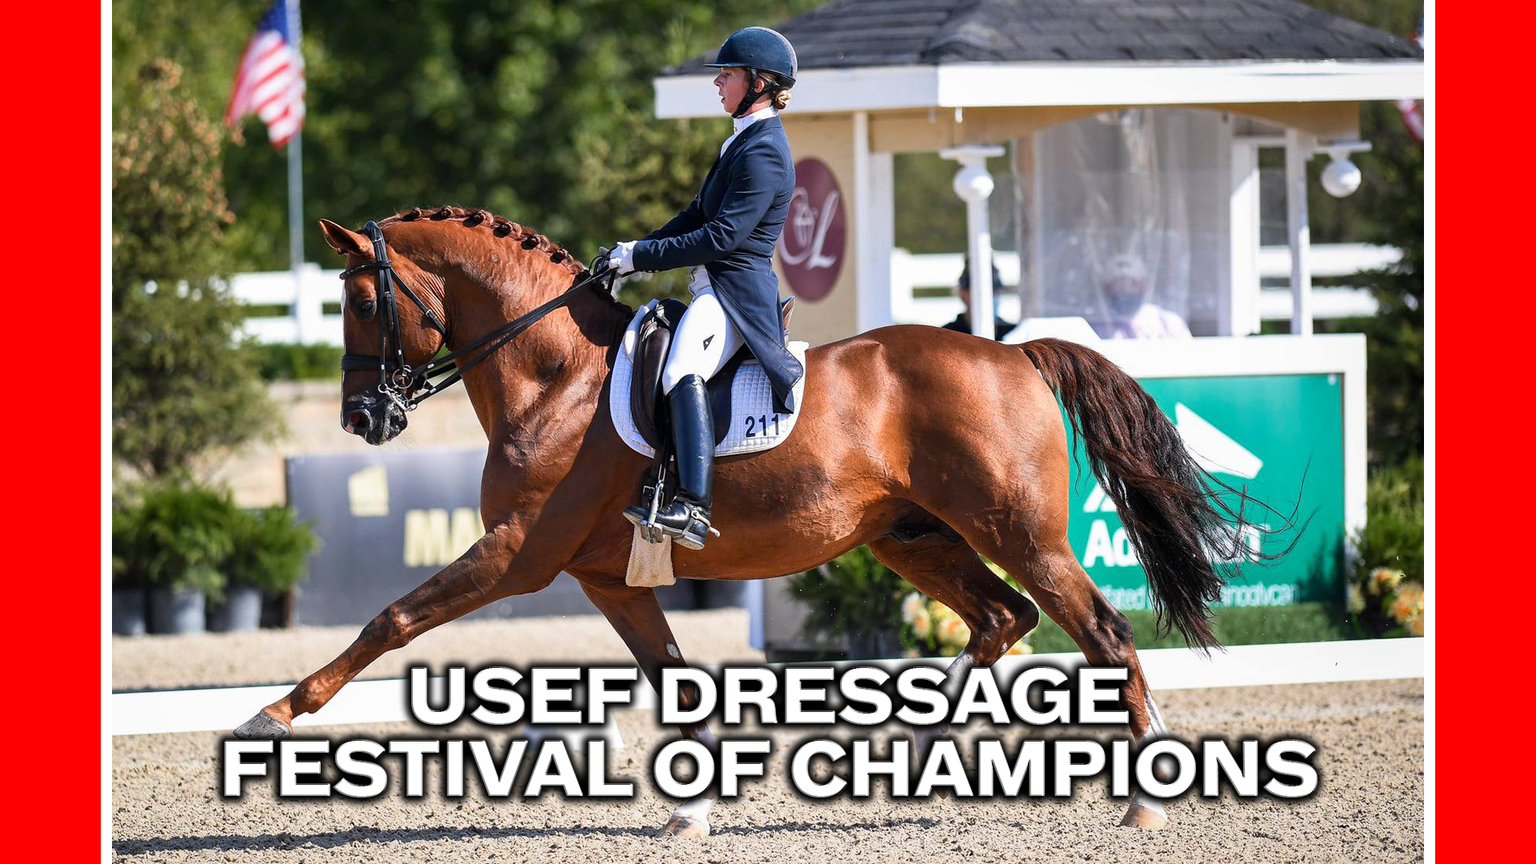 USEF Festival of Champions Highlights